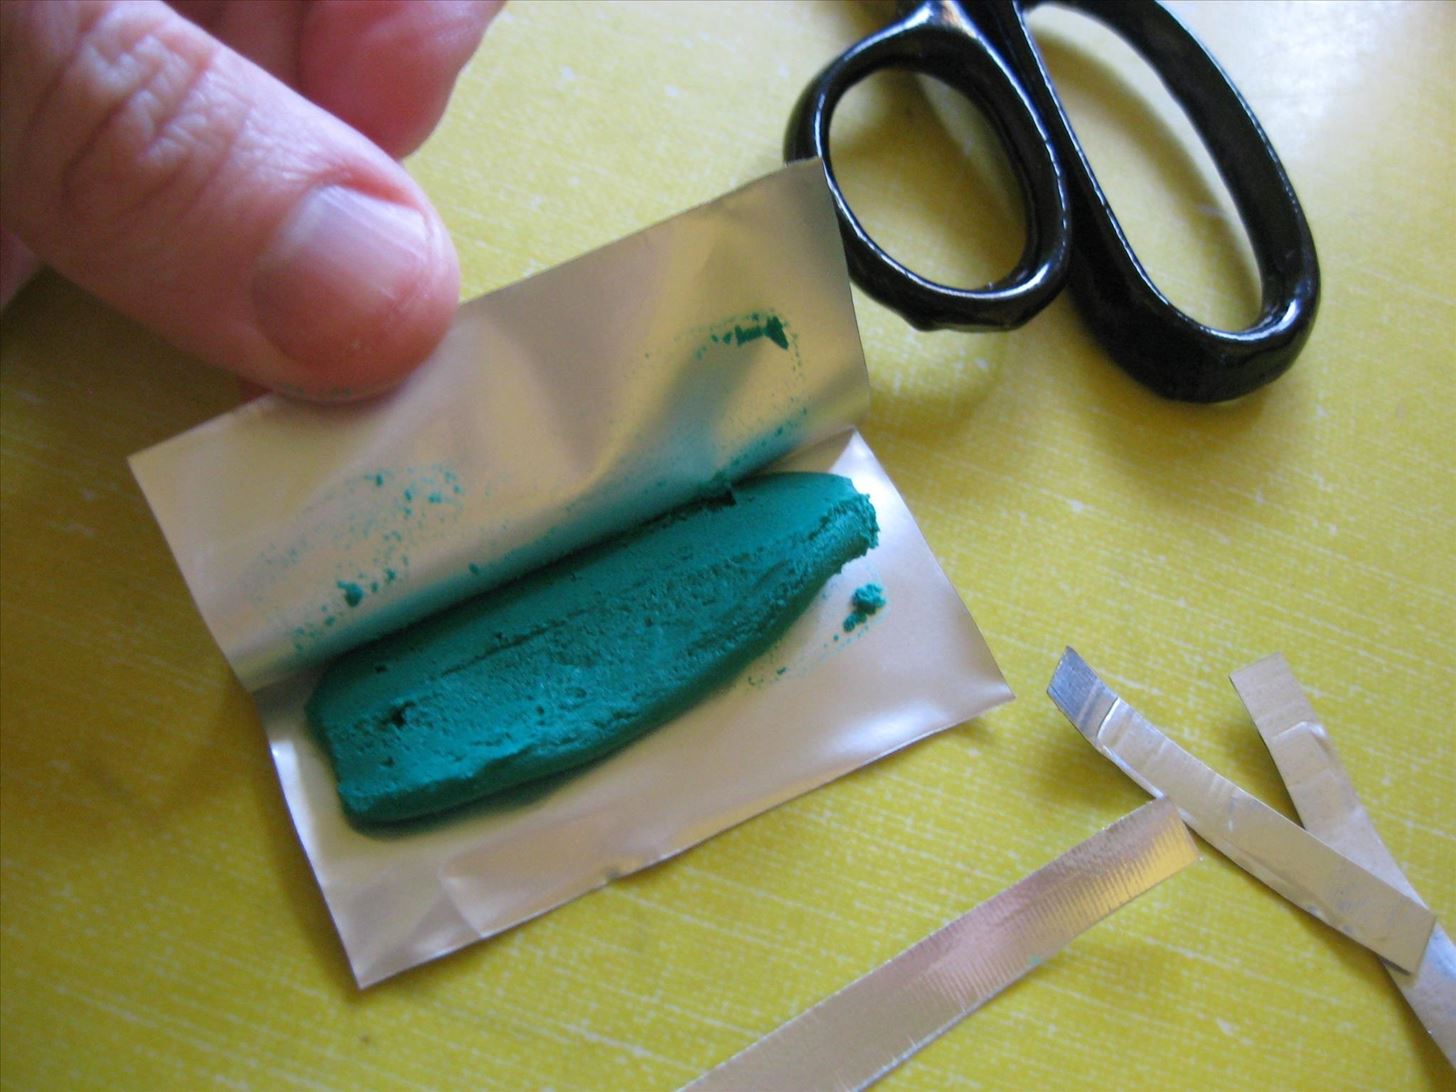 Top 12 Hacks for Making Your Gadgets Better with Sugru